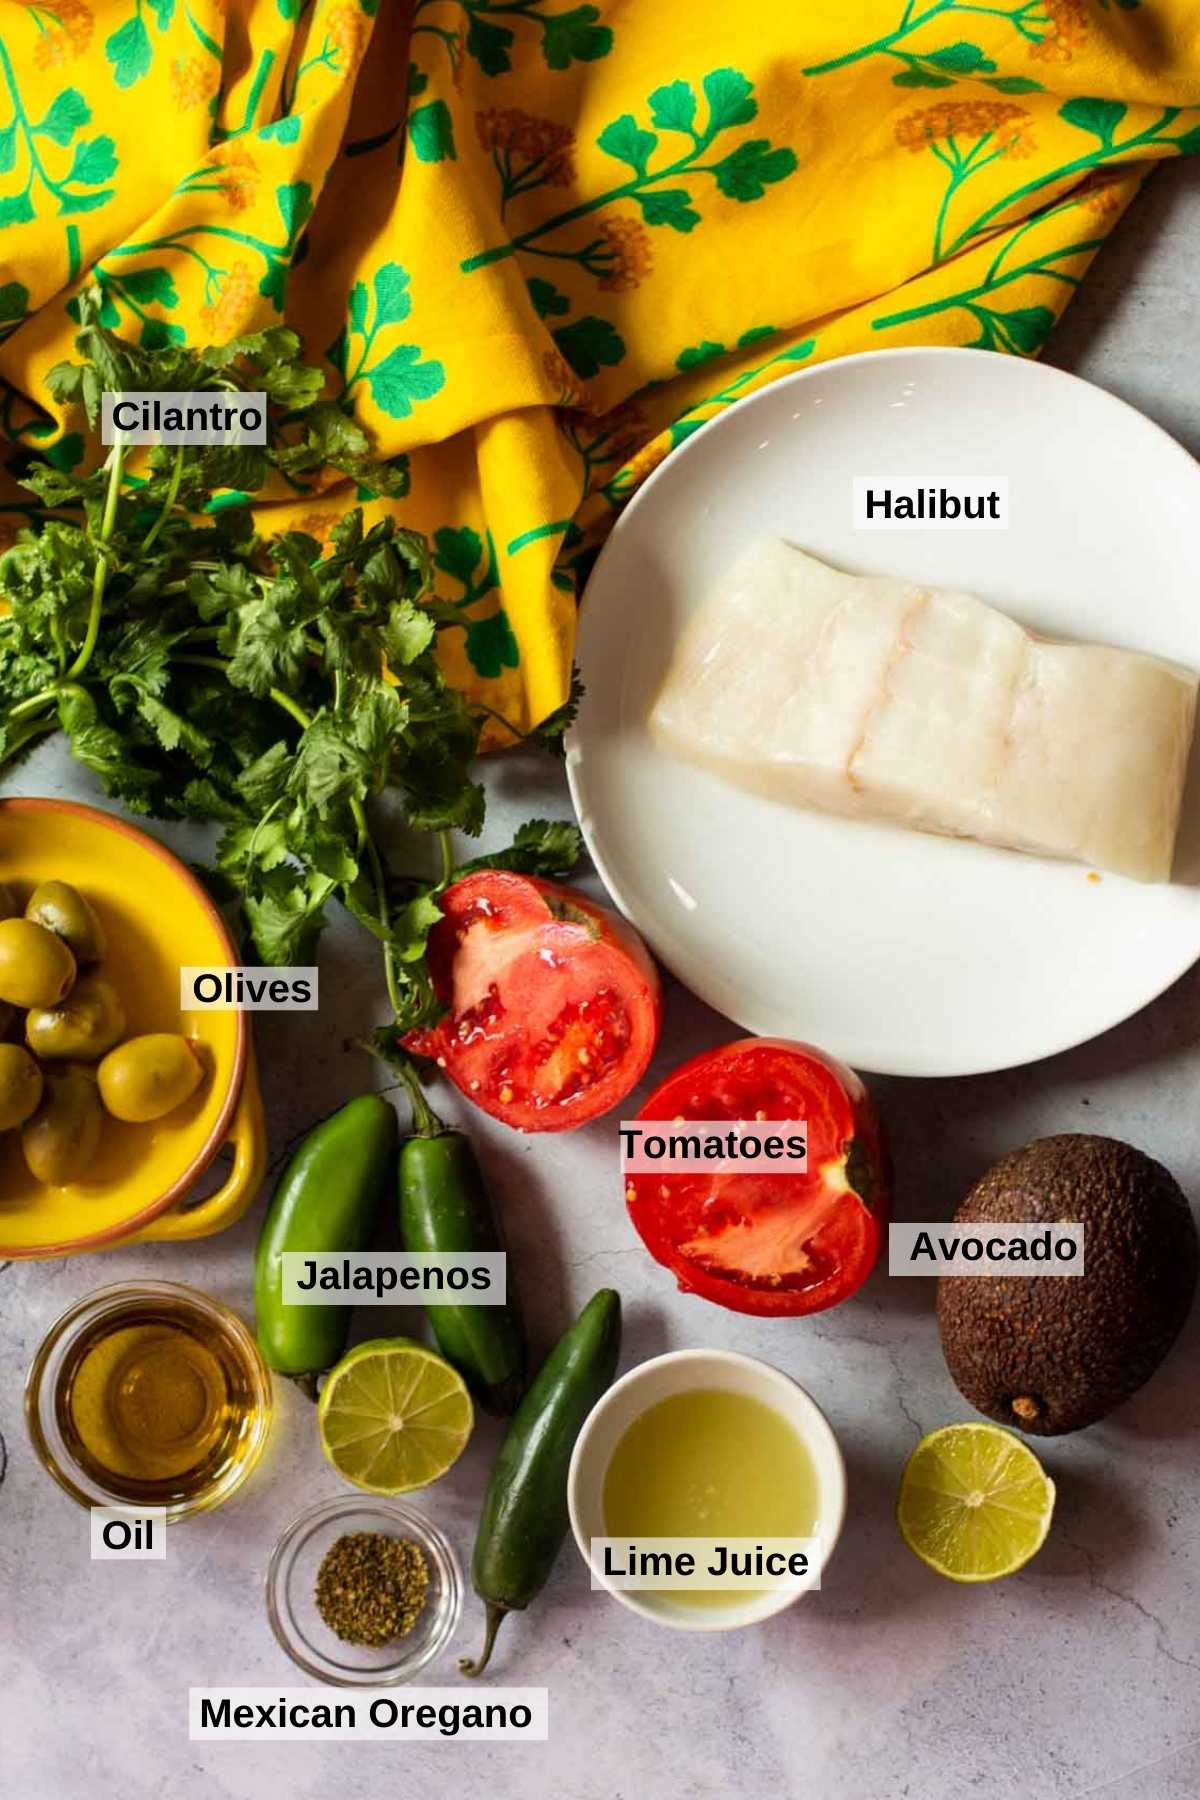 Ingredients to make halibut ceviche.